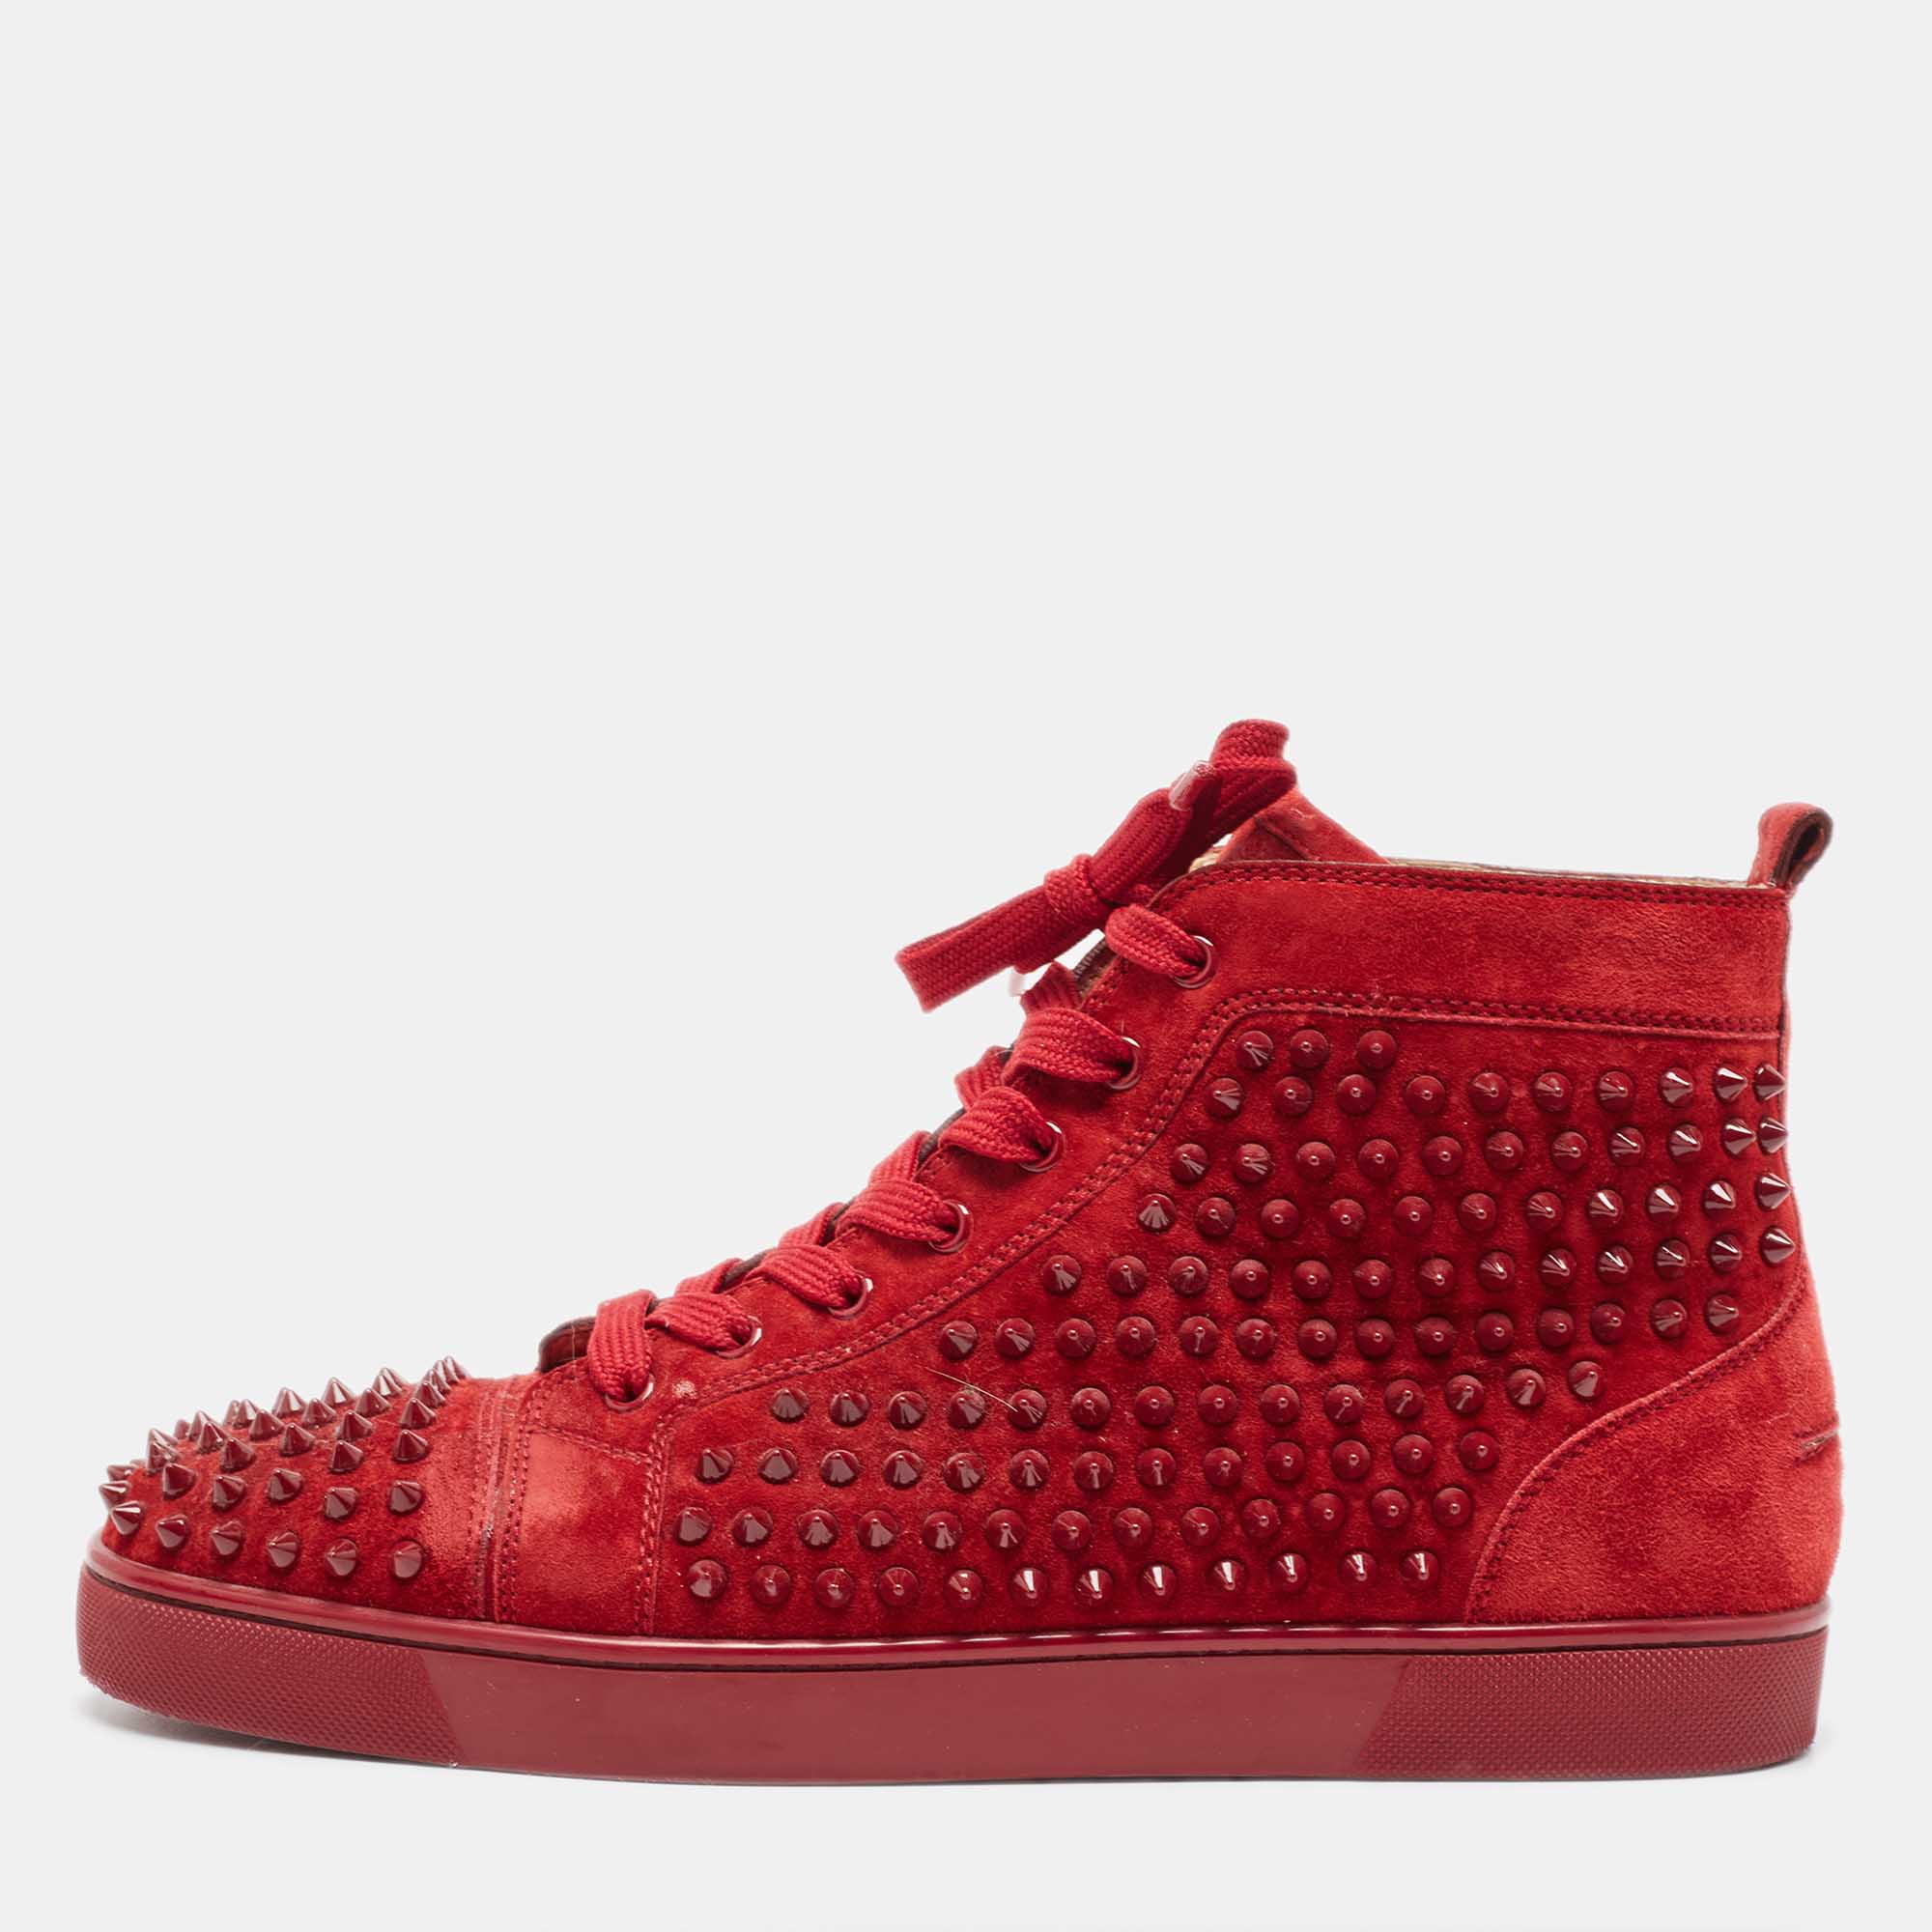 Christian Louboutin Grey Suede Louis Spikes High Top Sneakers Size